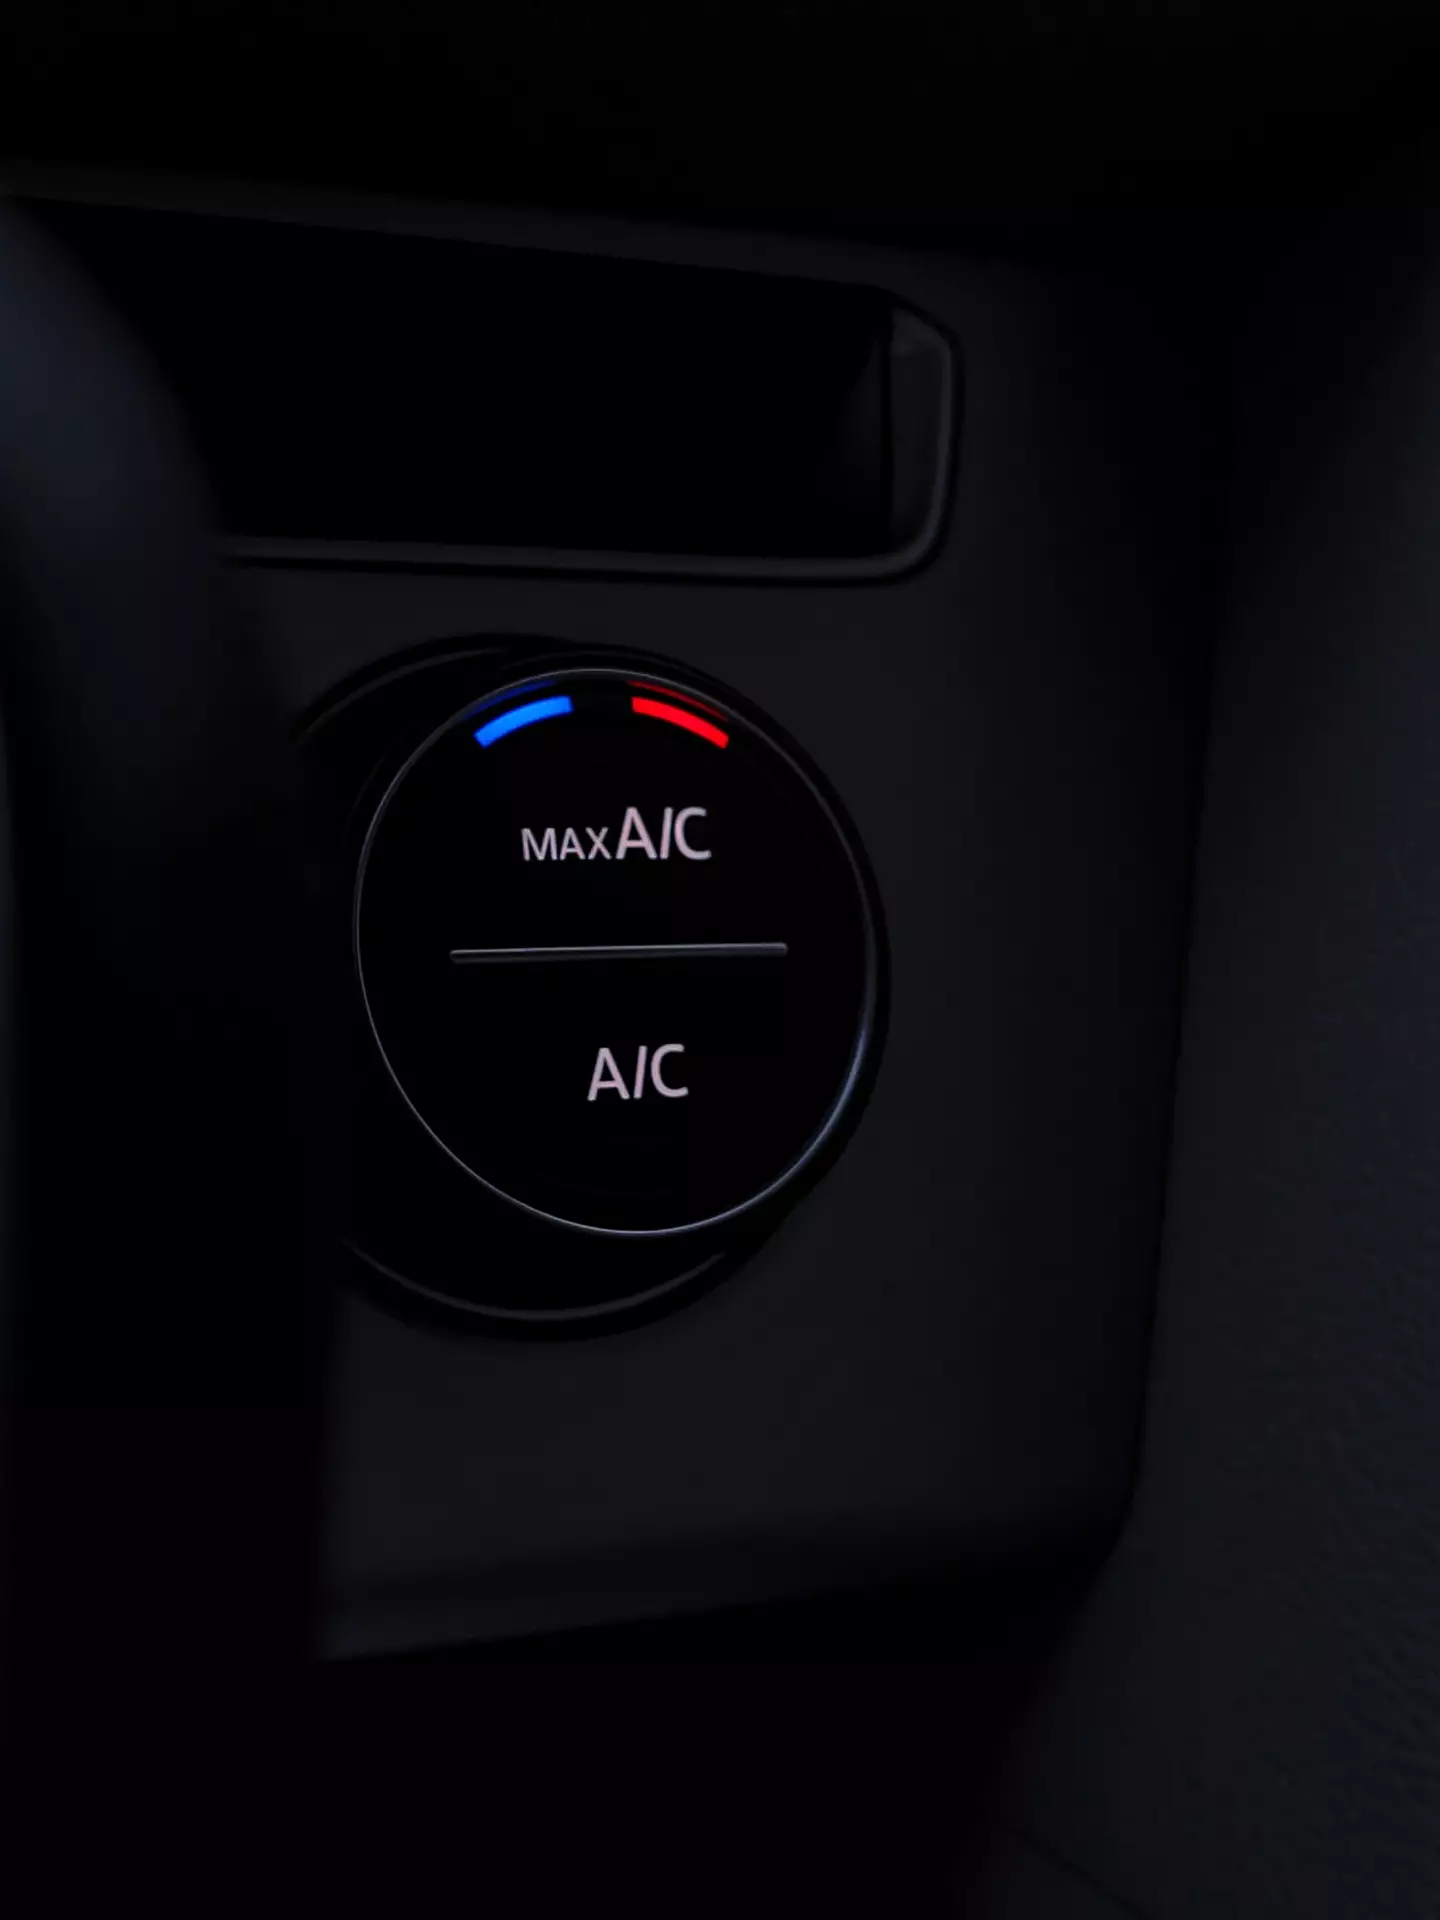 Drivers are only now just realising they don’t know how to use the outside and inside circulation button properly on cars.